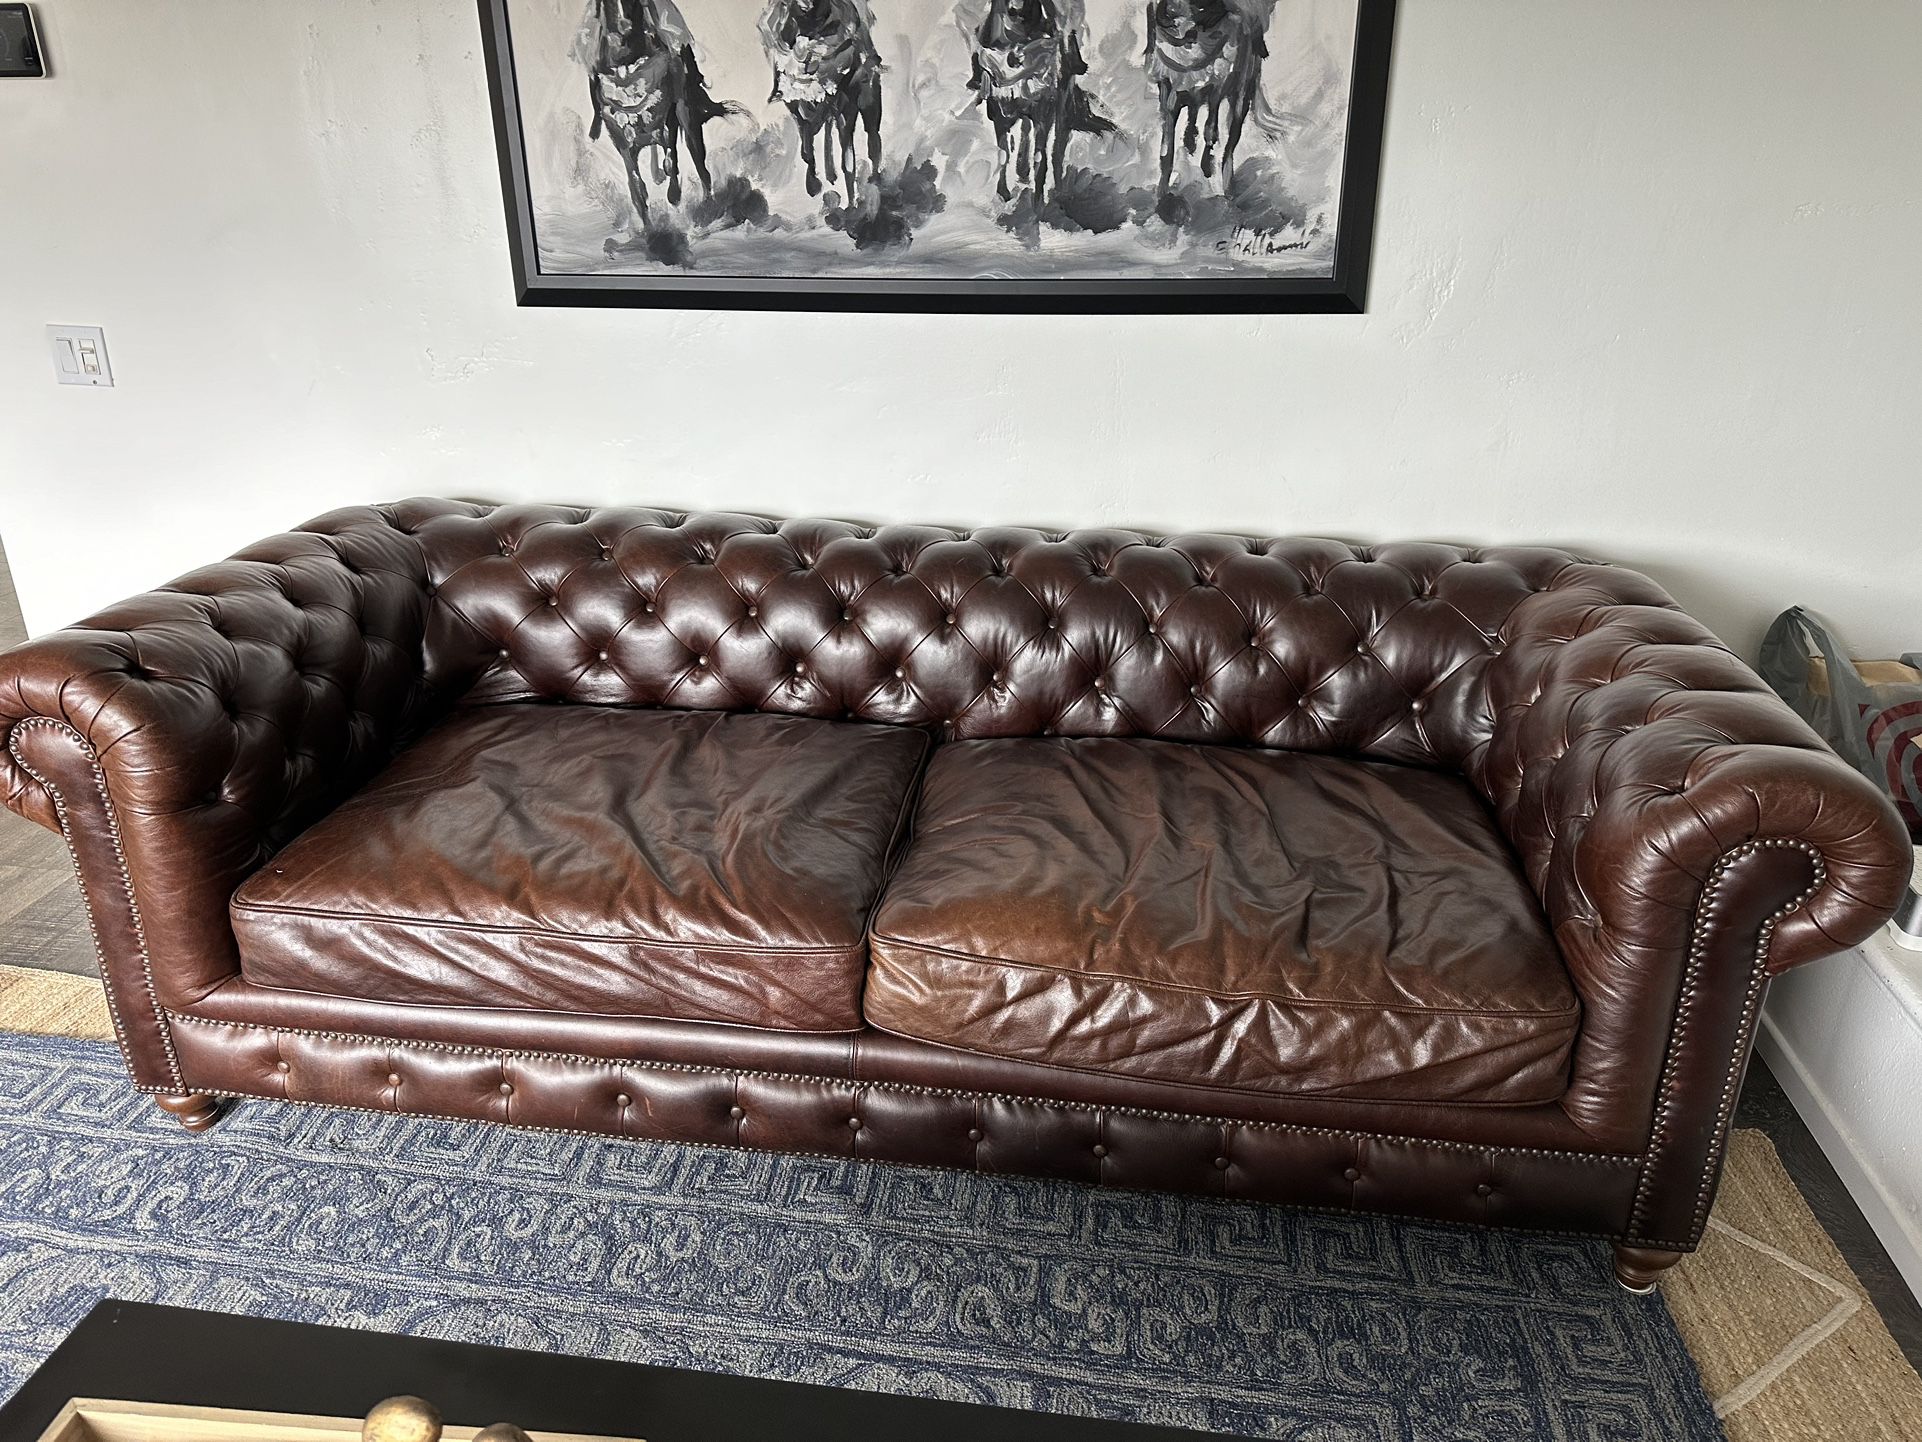 Leather Coach in great condition 